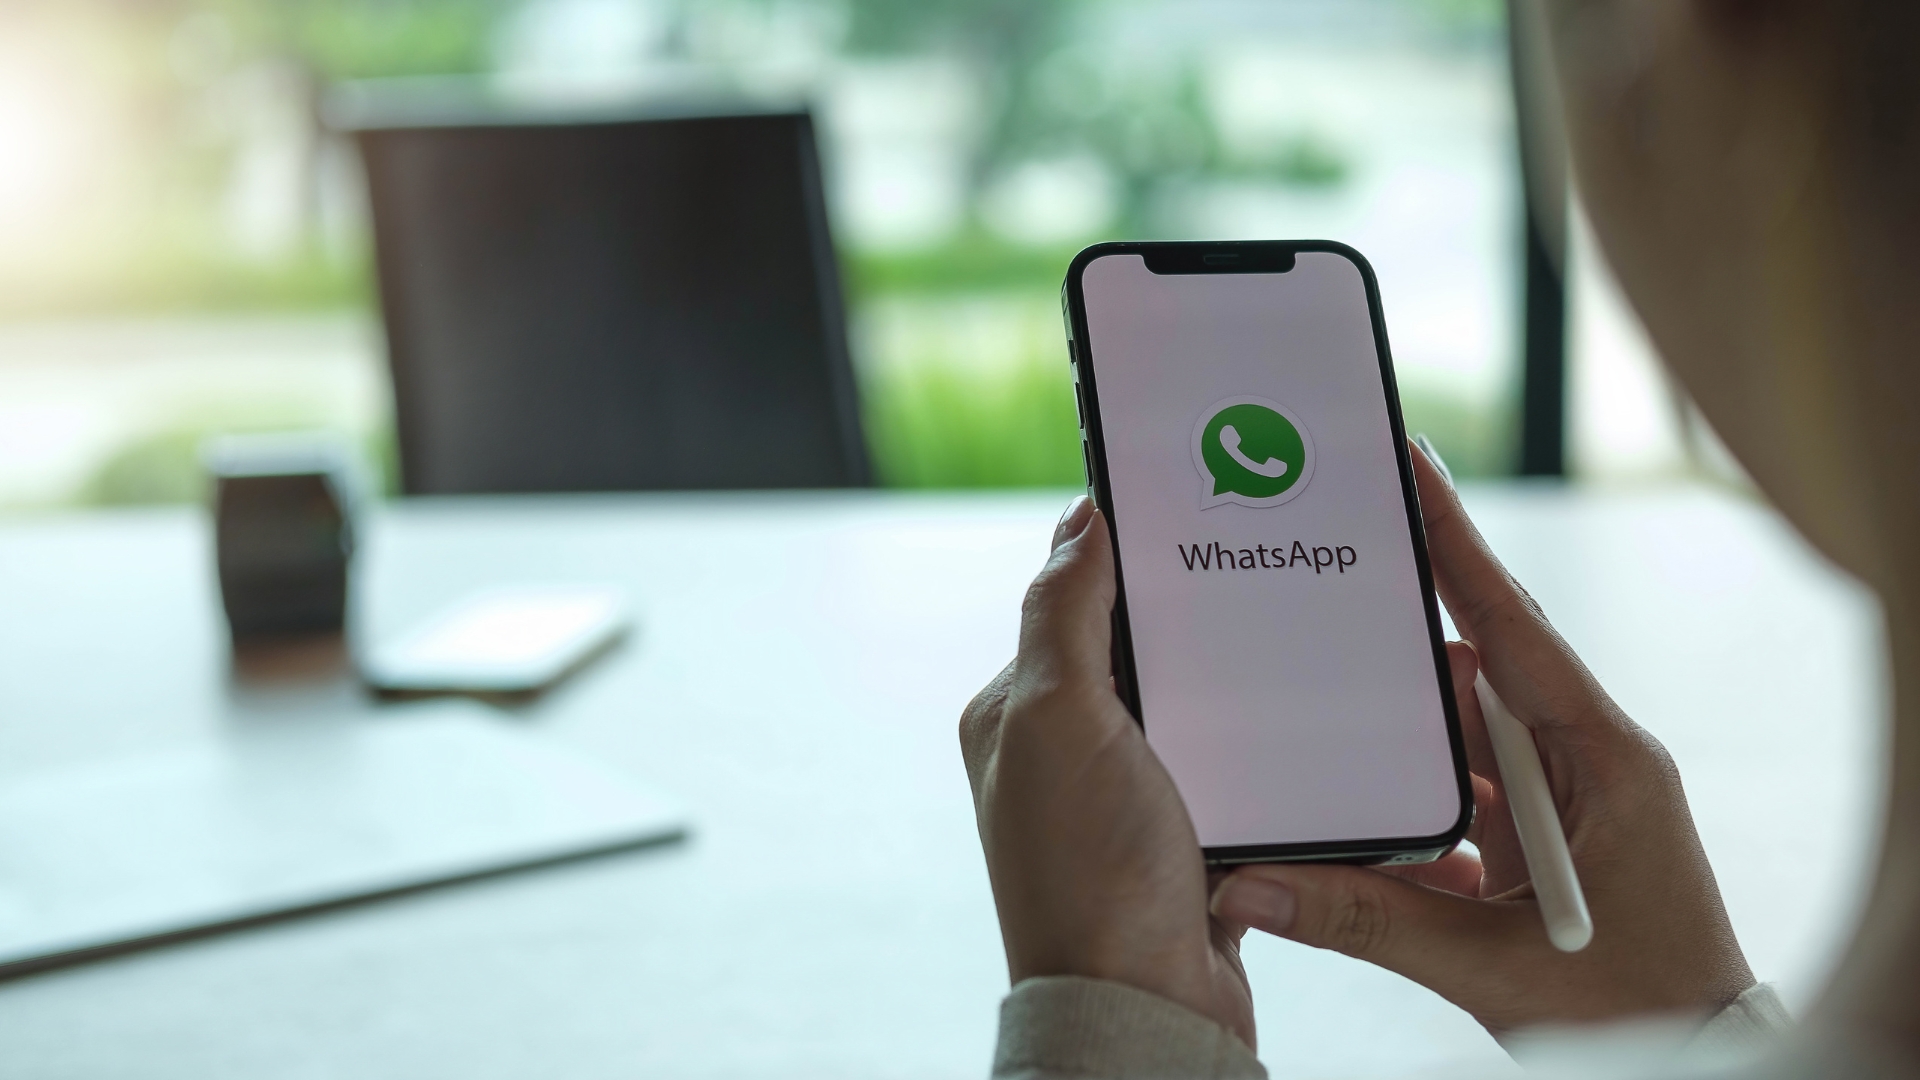 Learn how to send audios with Vegeta’s voice on WhatsApp